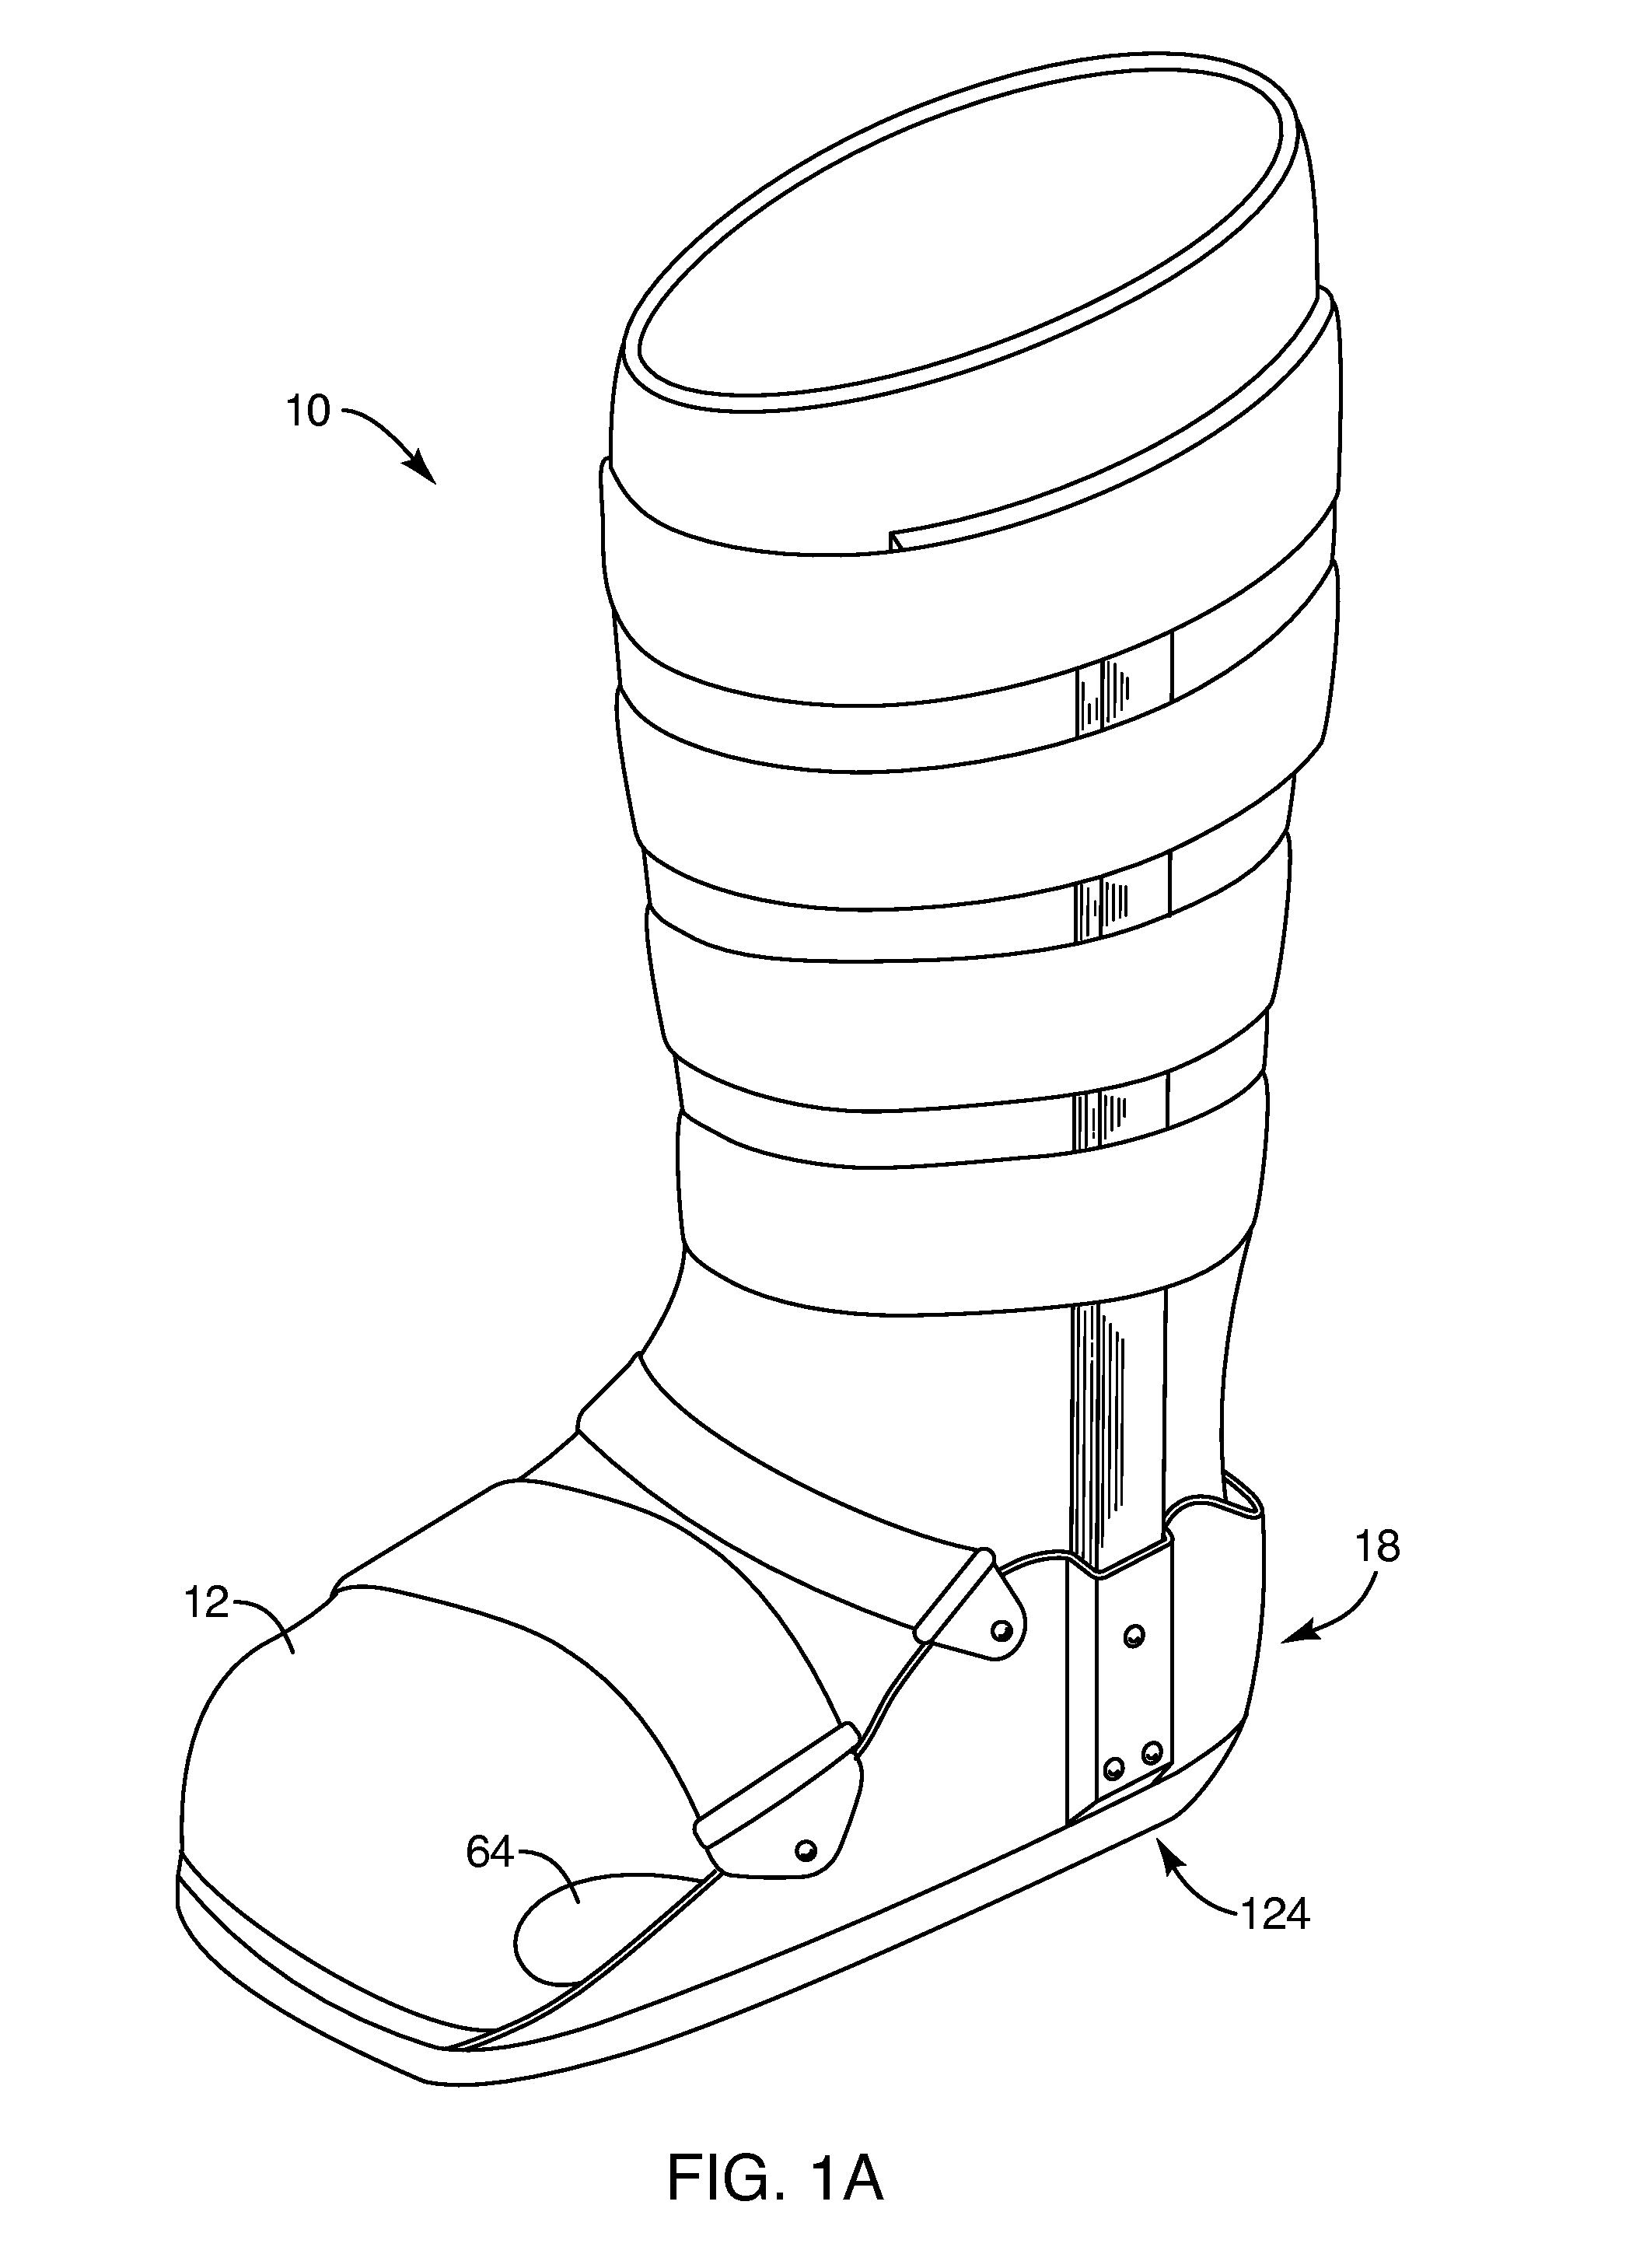 Systems and methods for providing a total contact and offloading cast